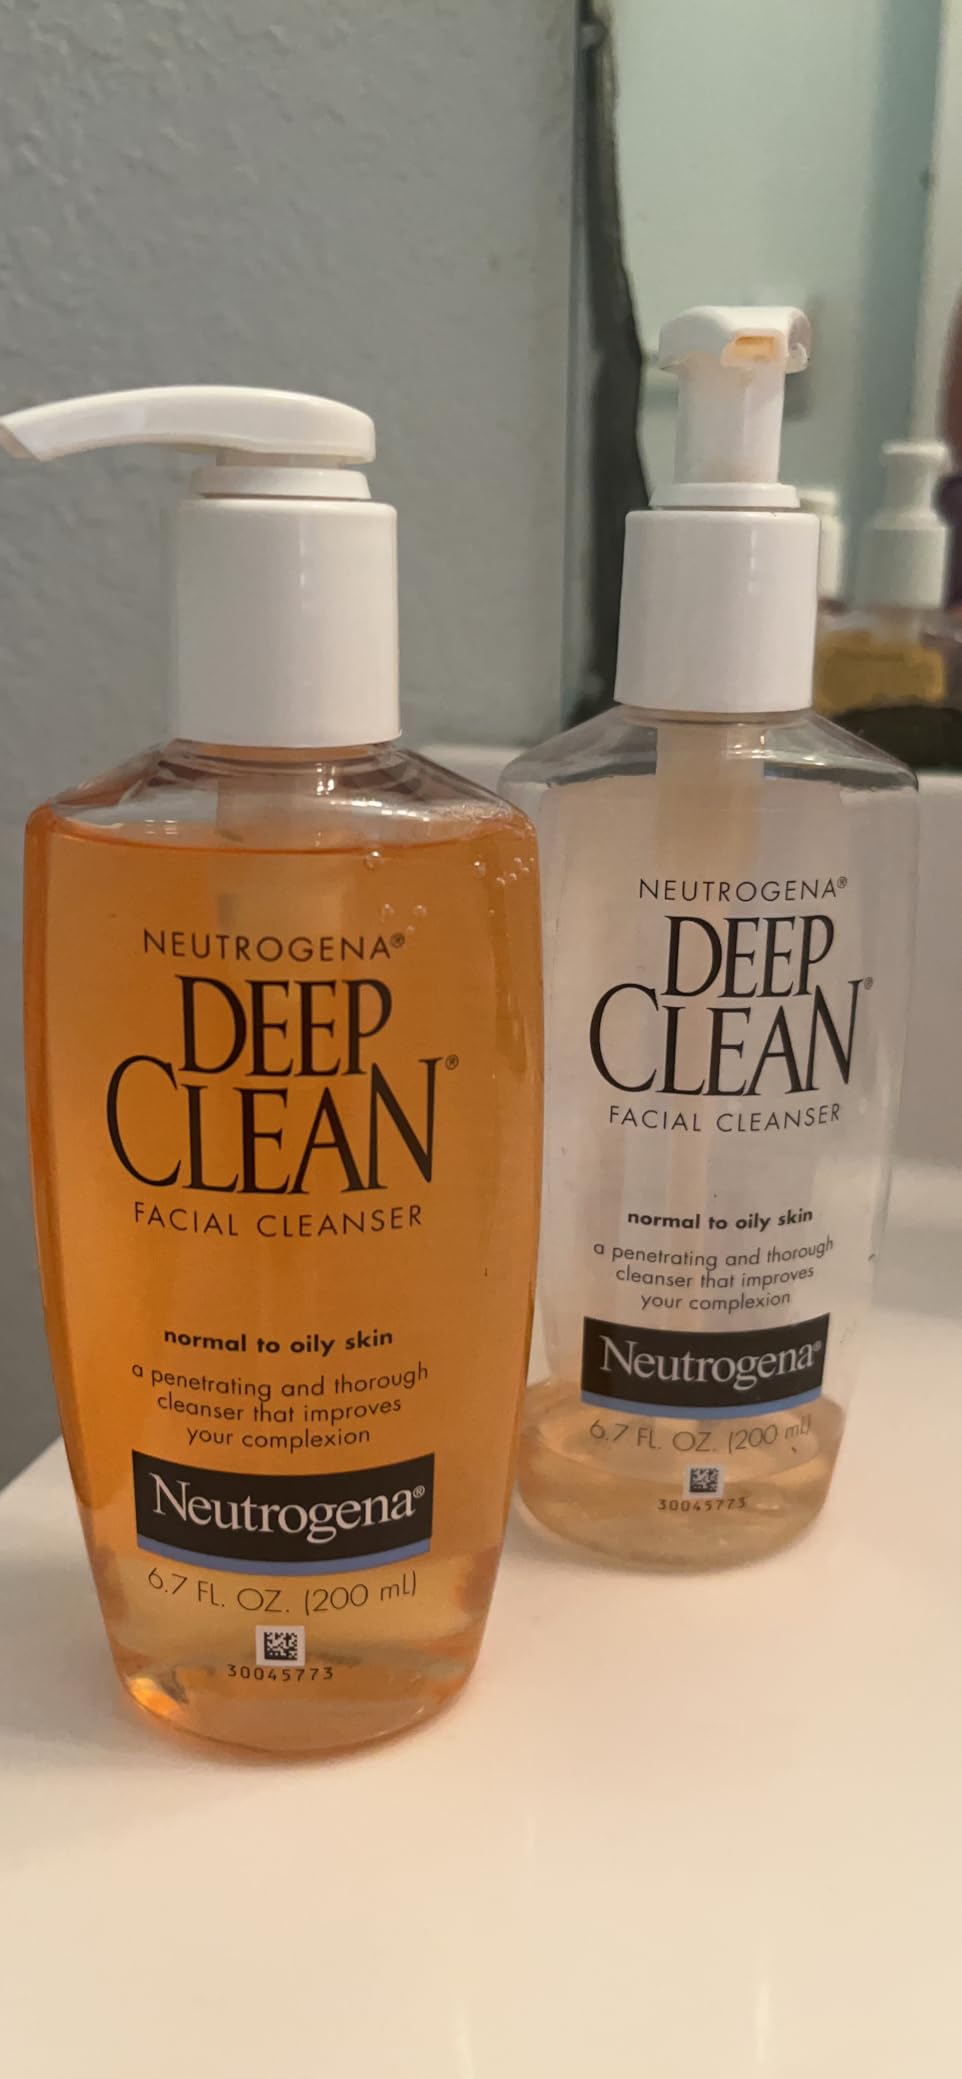 Deep Clean is the only face wash I use